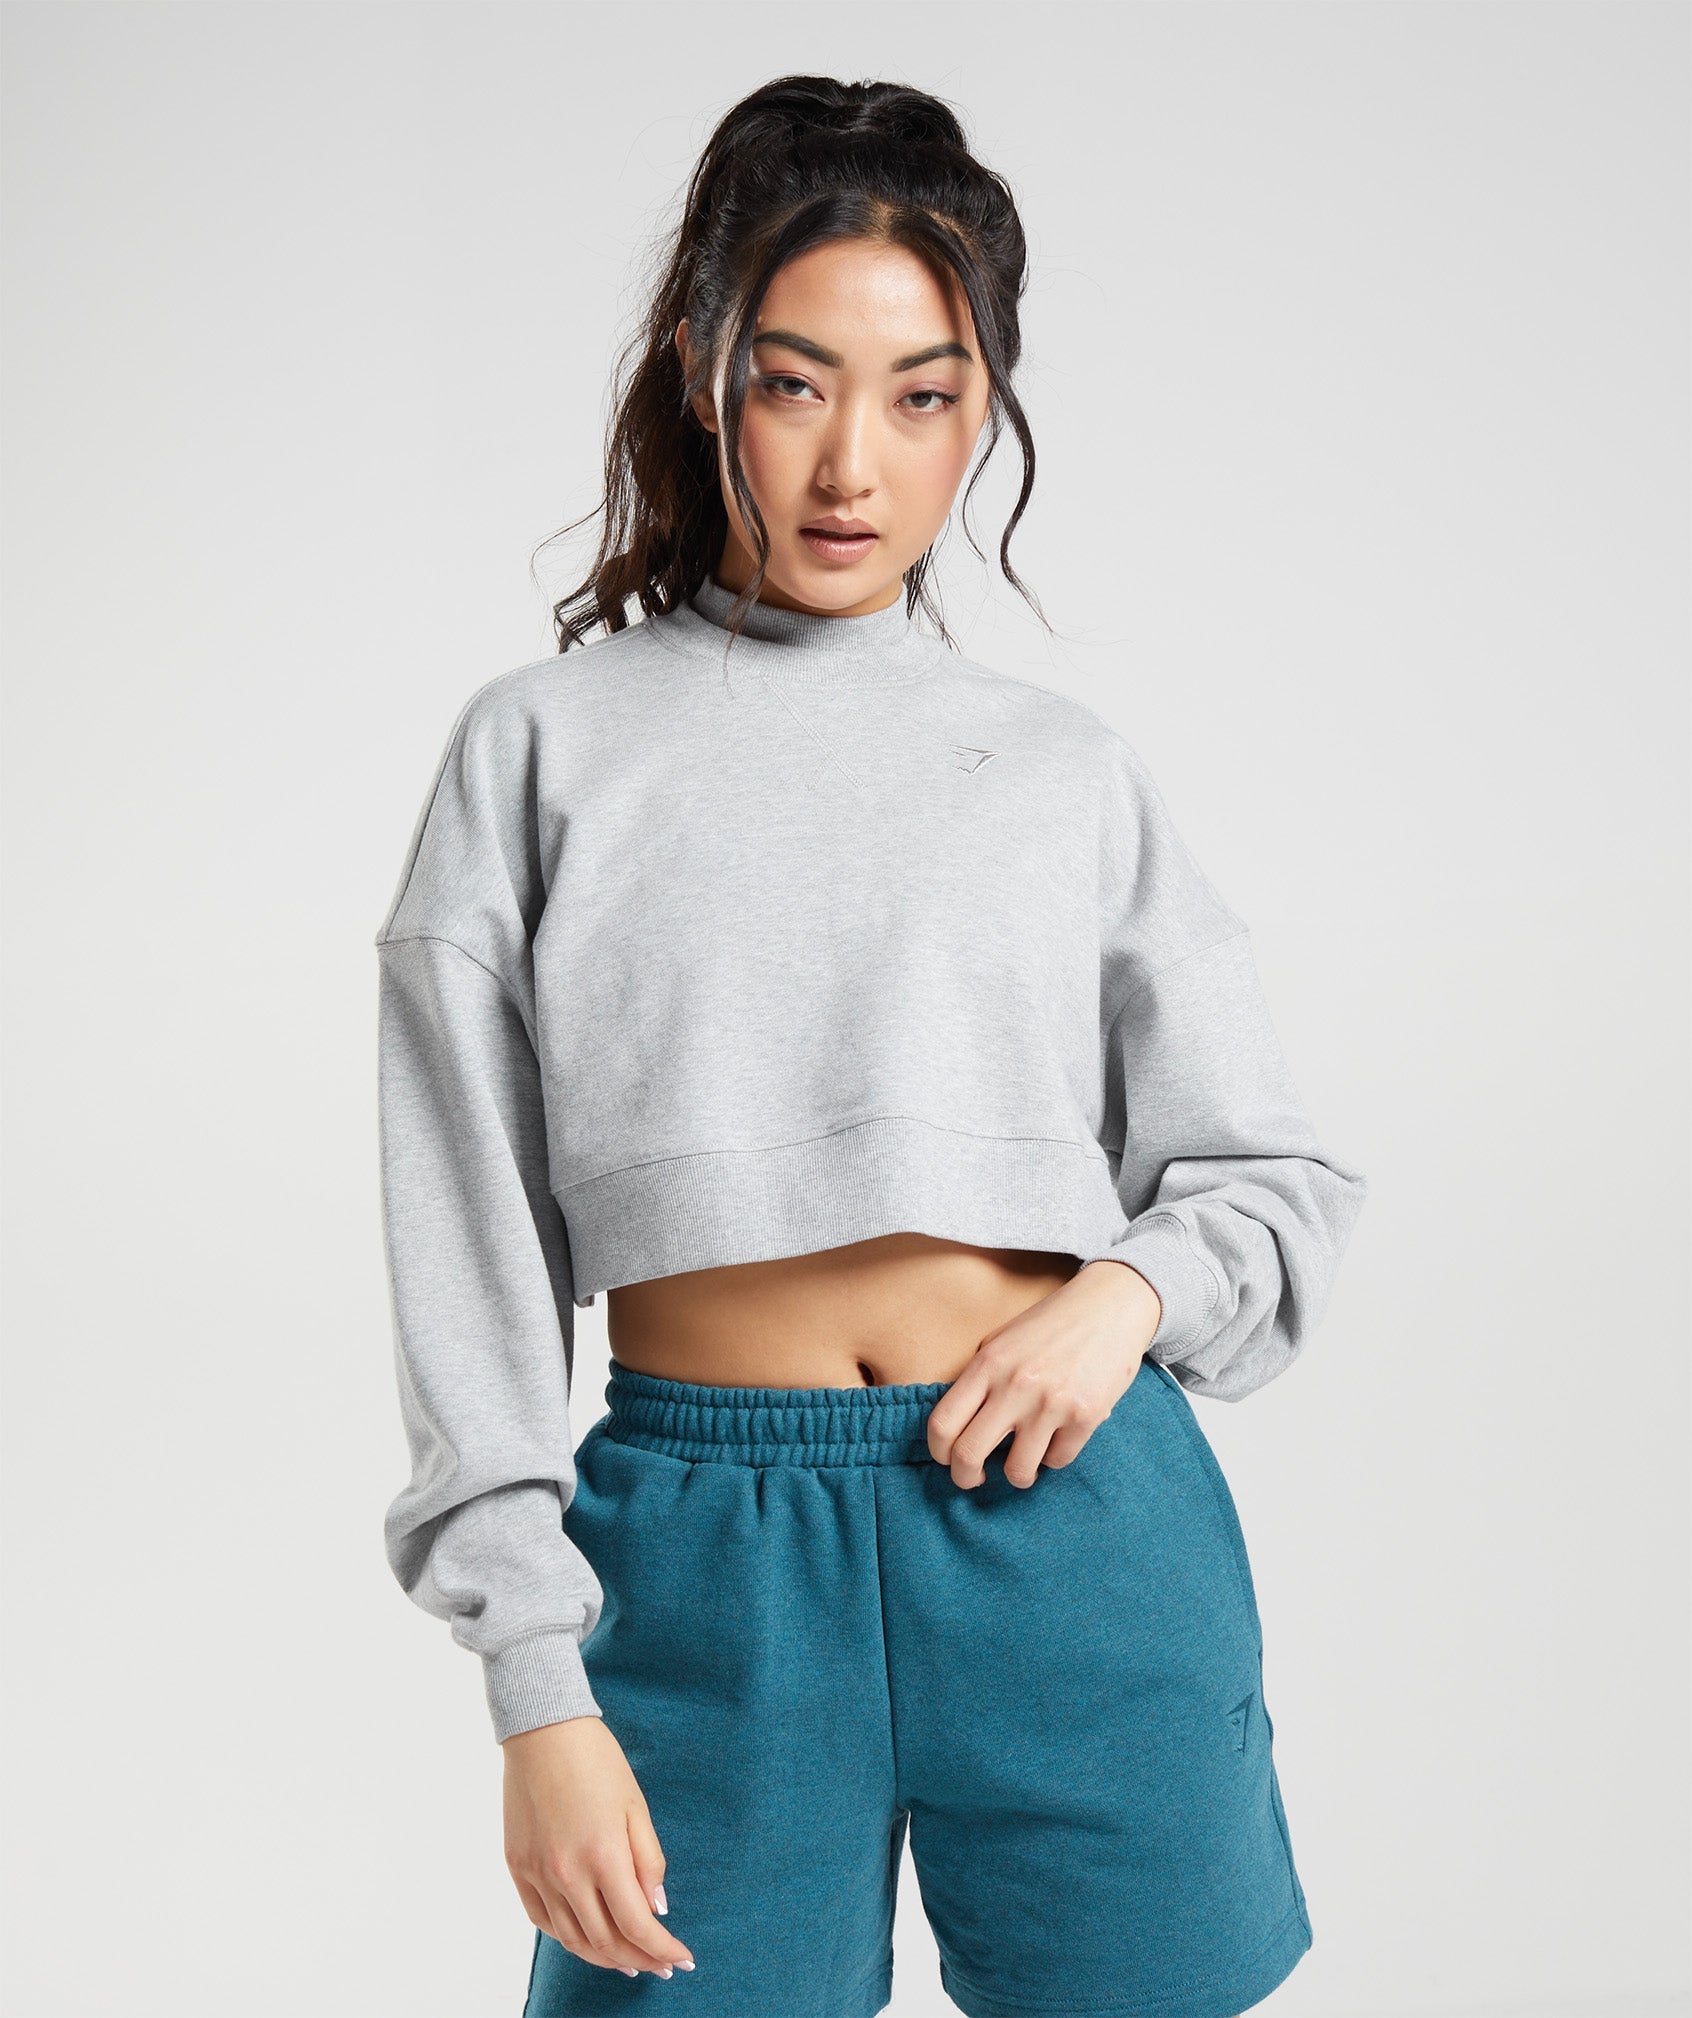 Rest Day Sweats Cropped Pullover in Light Grey Core Marl is out of stock